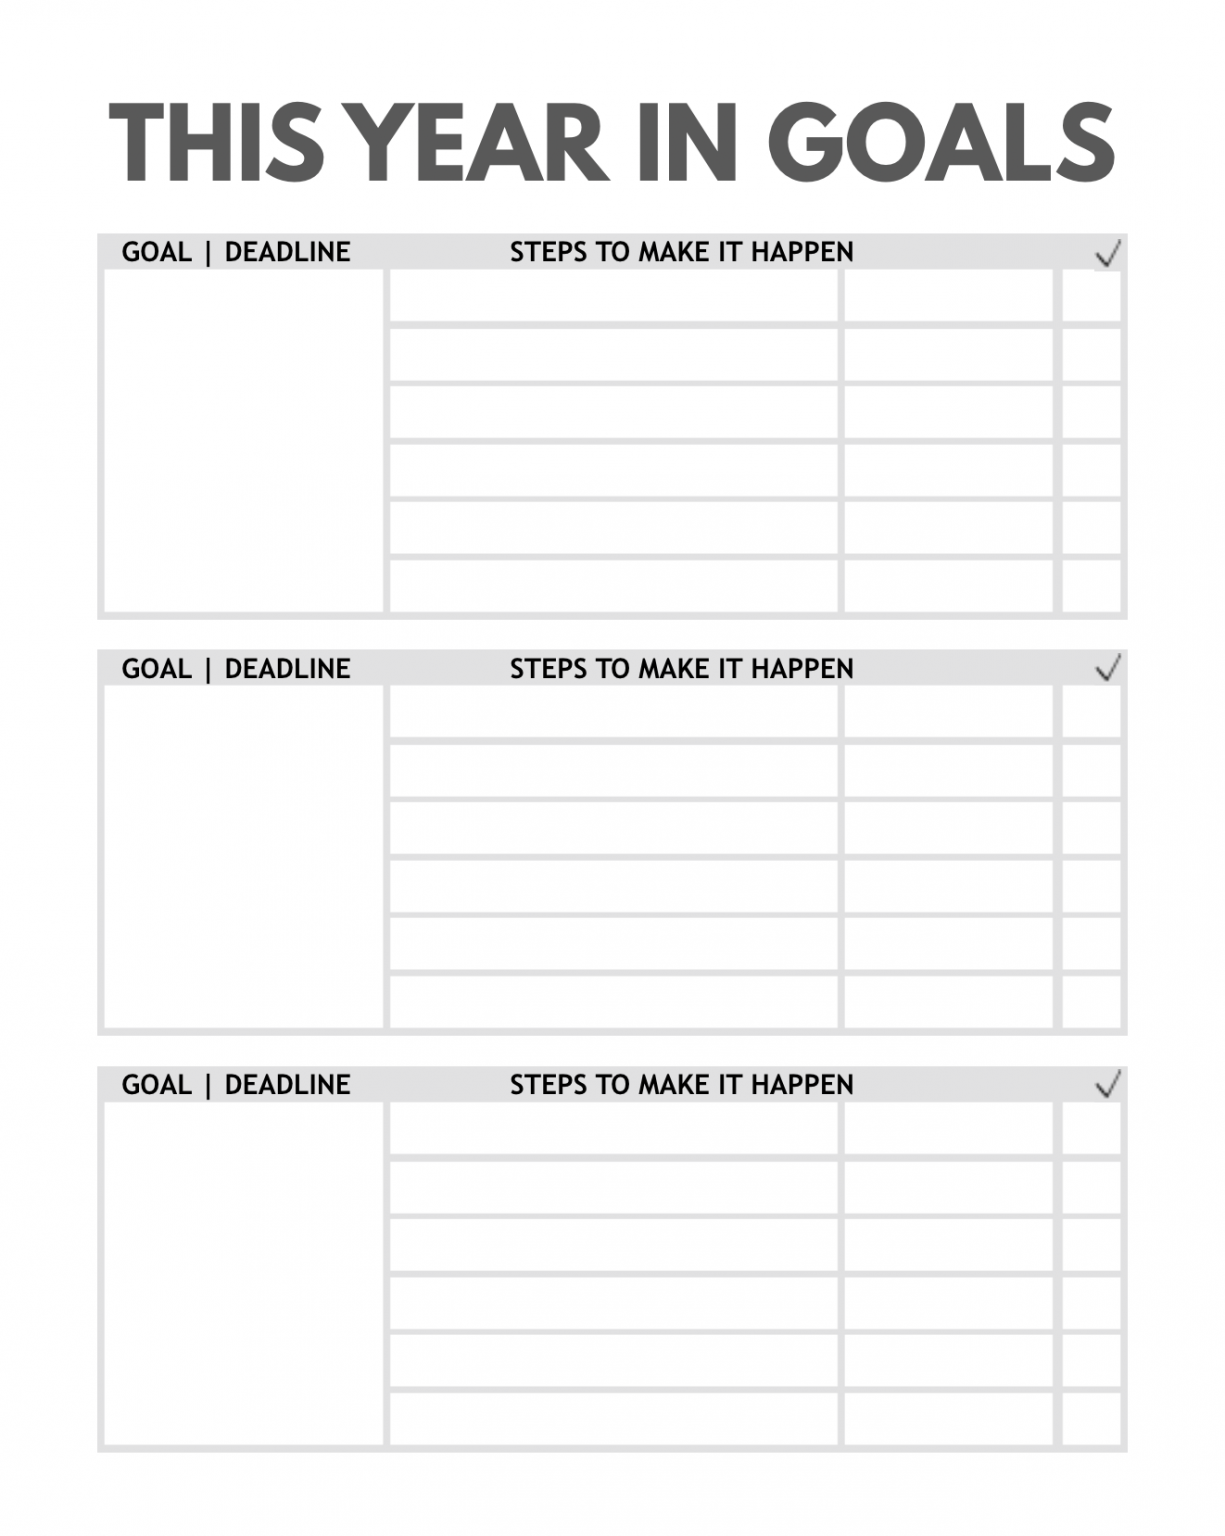 Goal Action Plan: Undated Agenda to Track Your Goals for the Year